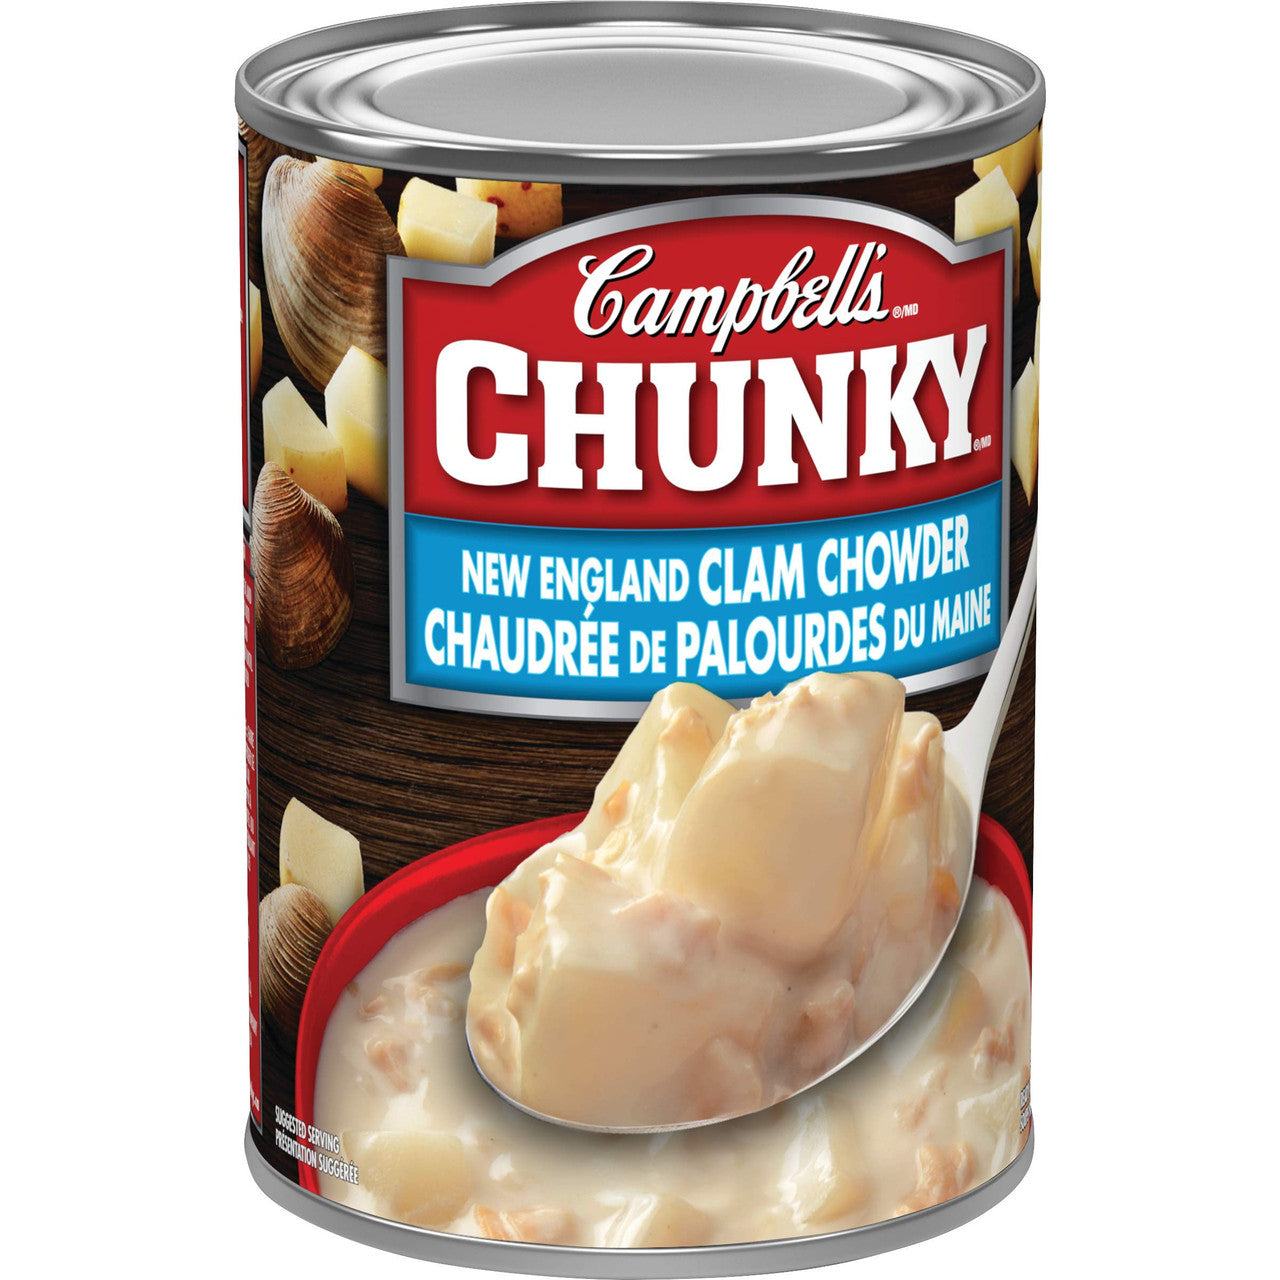 Campbell's Chunky New England Clam Chowder, 540ml/18.3 oz., (Canadian)